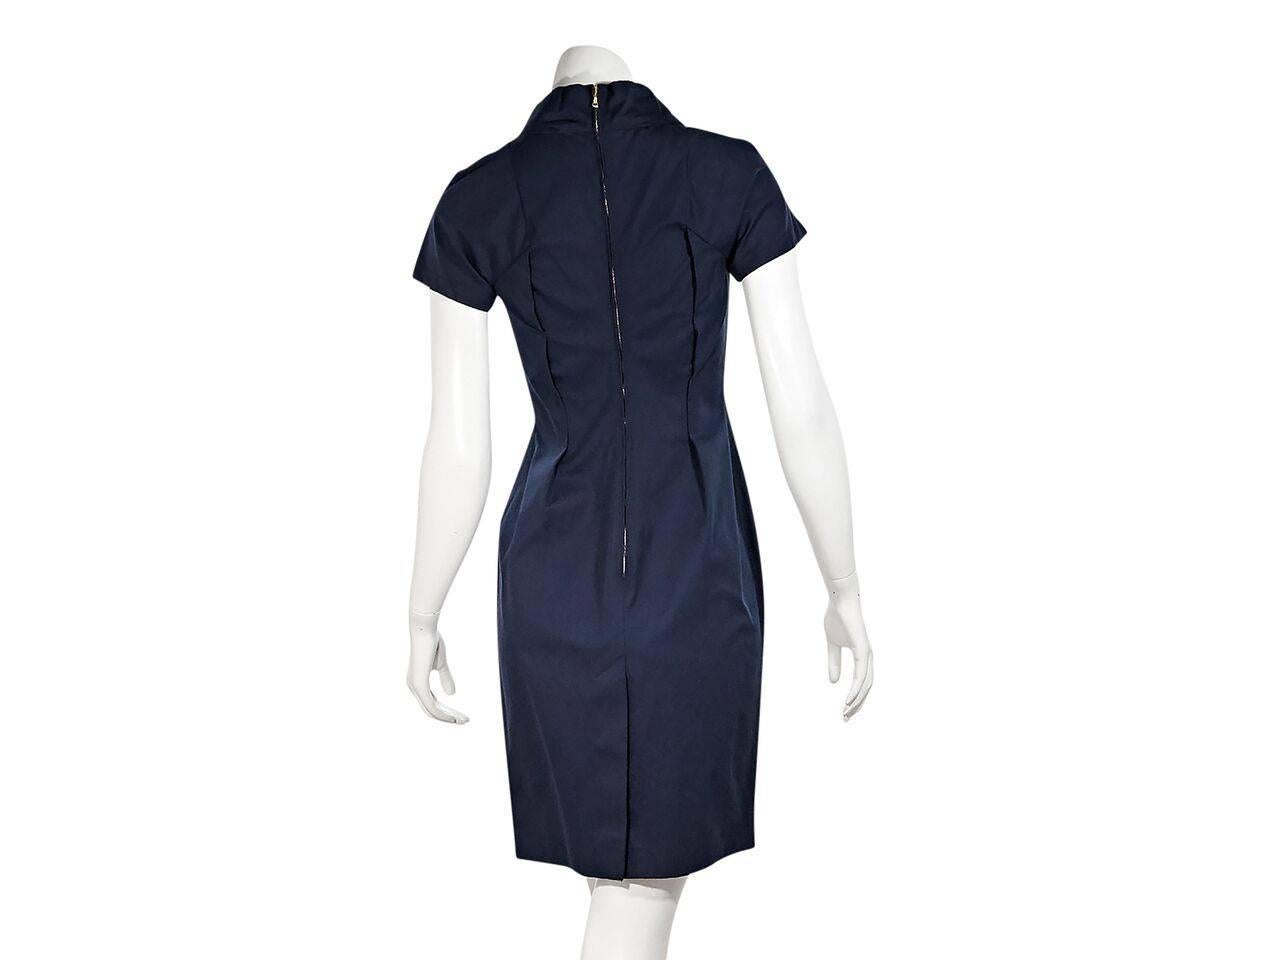 navy blue sheath dress with sleeves